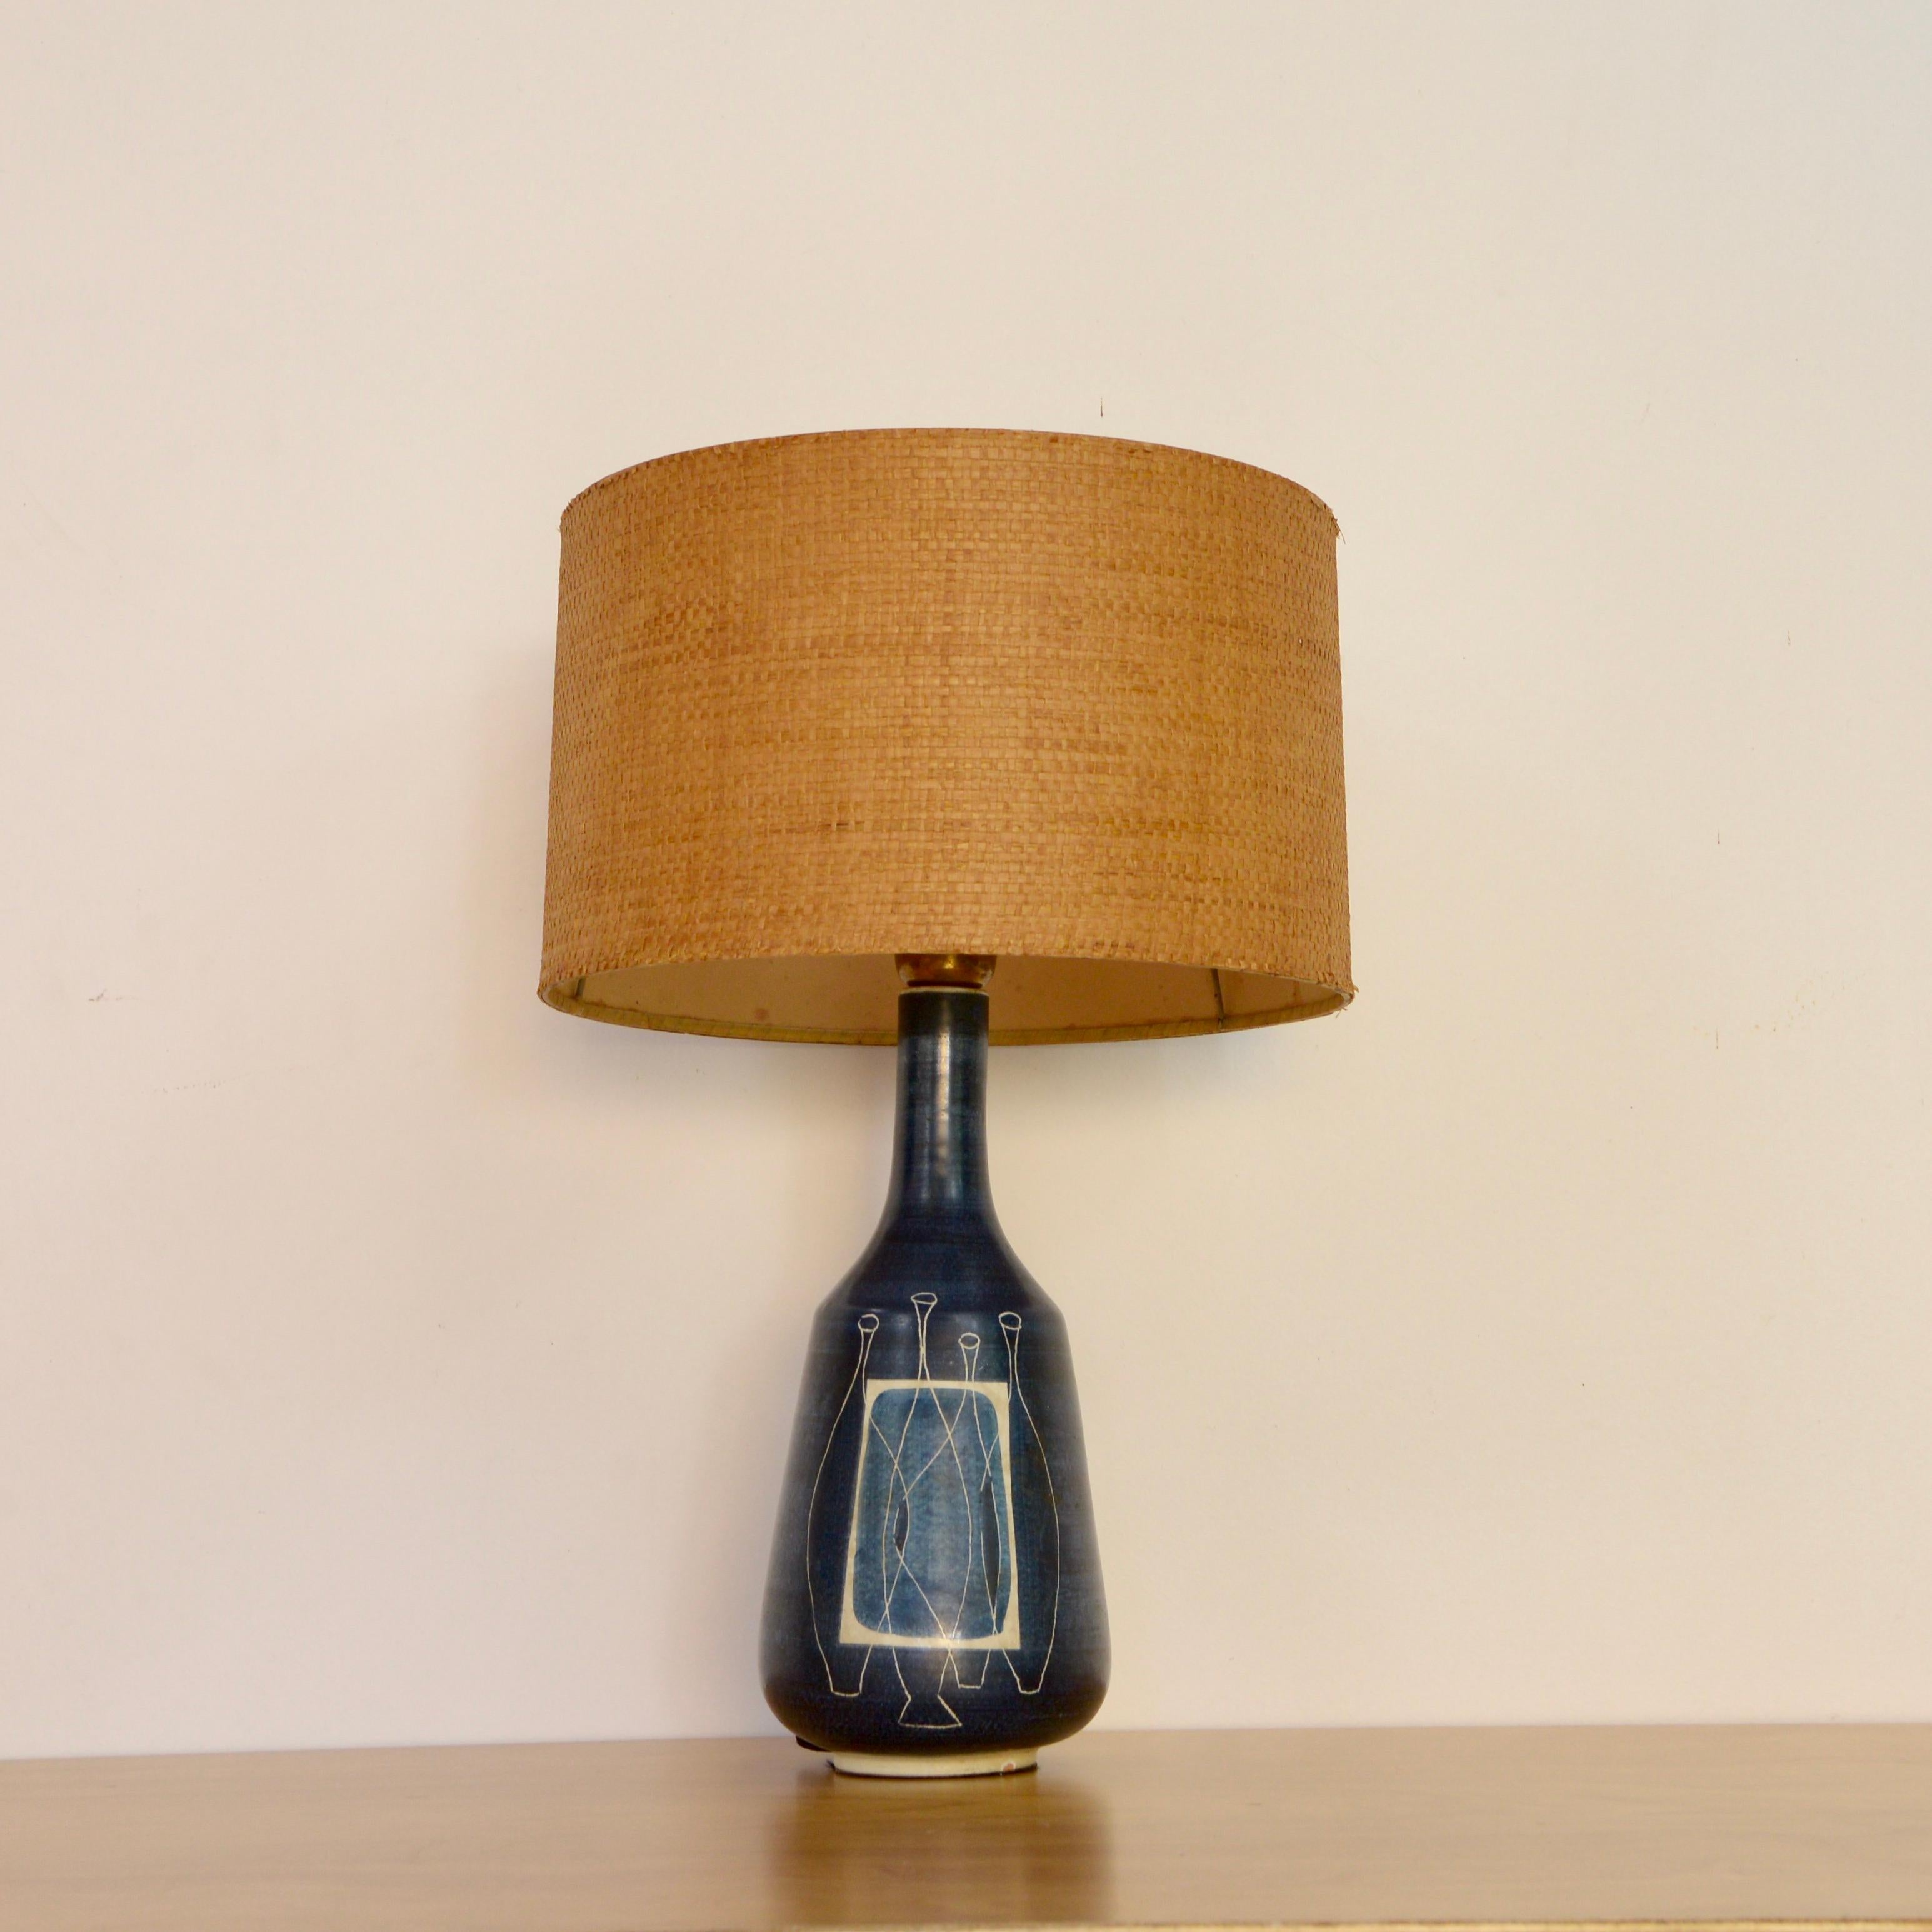 Vintage 1950s ceramic Italian table lamp with Sgraffito decoration in possibly indigo or lapis lazuli blue and rattan lamp shade. Fully rewired with a single E12 candelabra based socket, ready to be used in the USA. Measurements:
Height